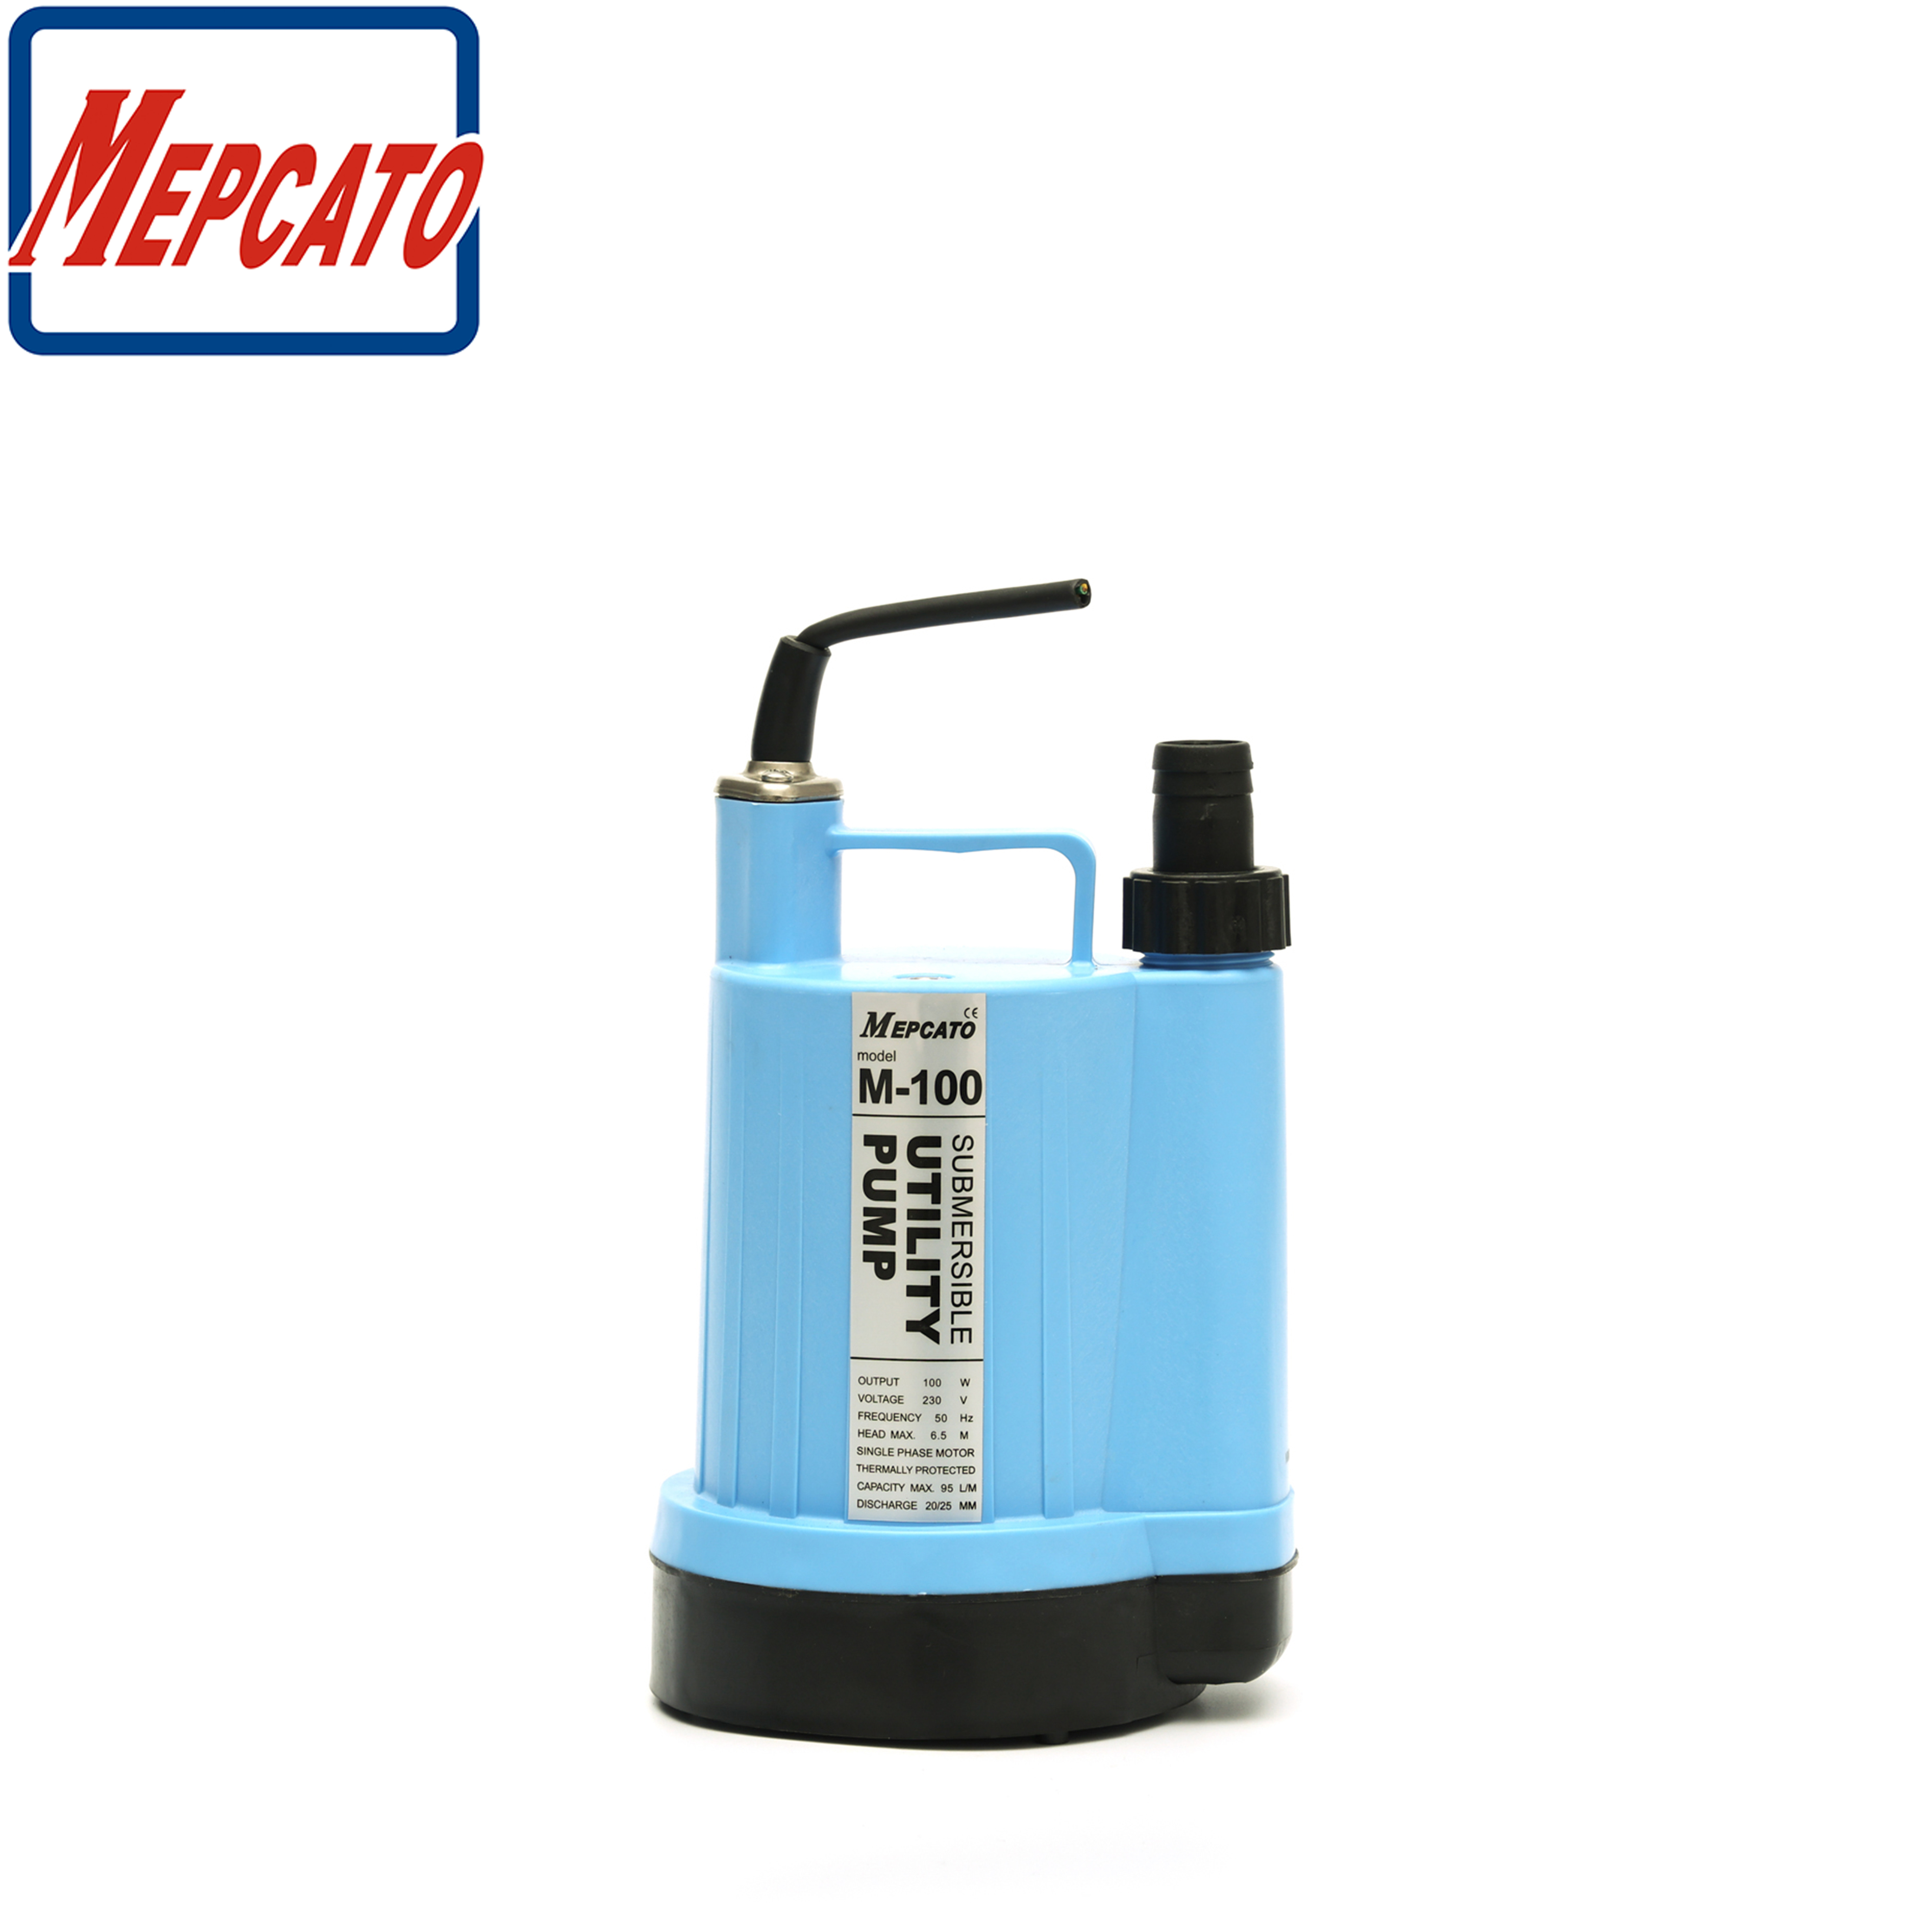 Low Level Residual Water Drainage Electric Plastic Submersible Pump with Floater for Water Tank Cellar Sump Pond Pool